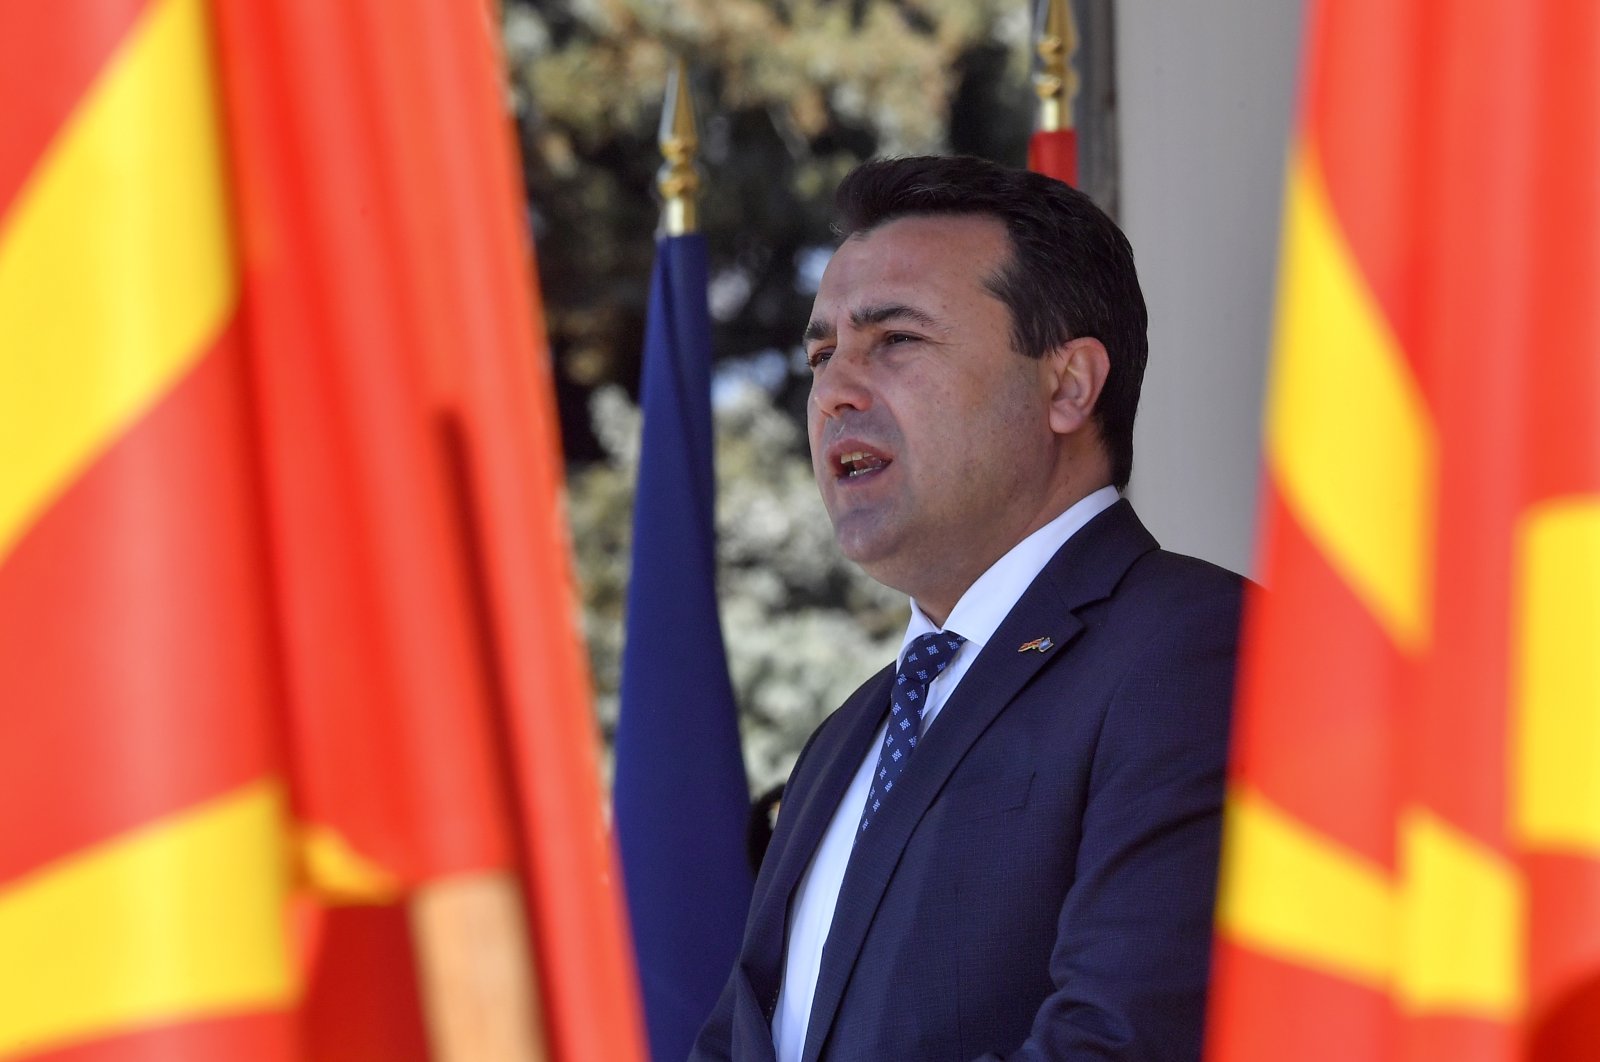 Macedonian Prime Minister Zoran Zaev addresses the soldiers during the ceremony marking one year since North Macedonia NATO membership in Skopje, Republic of North Macedonia, March 27, 2021. (EPA)